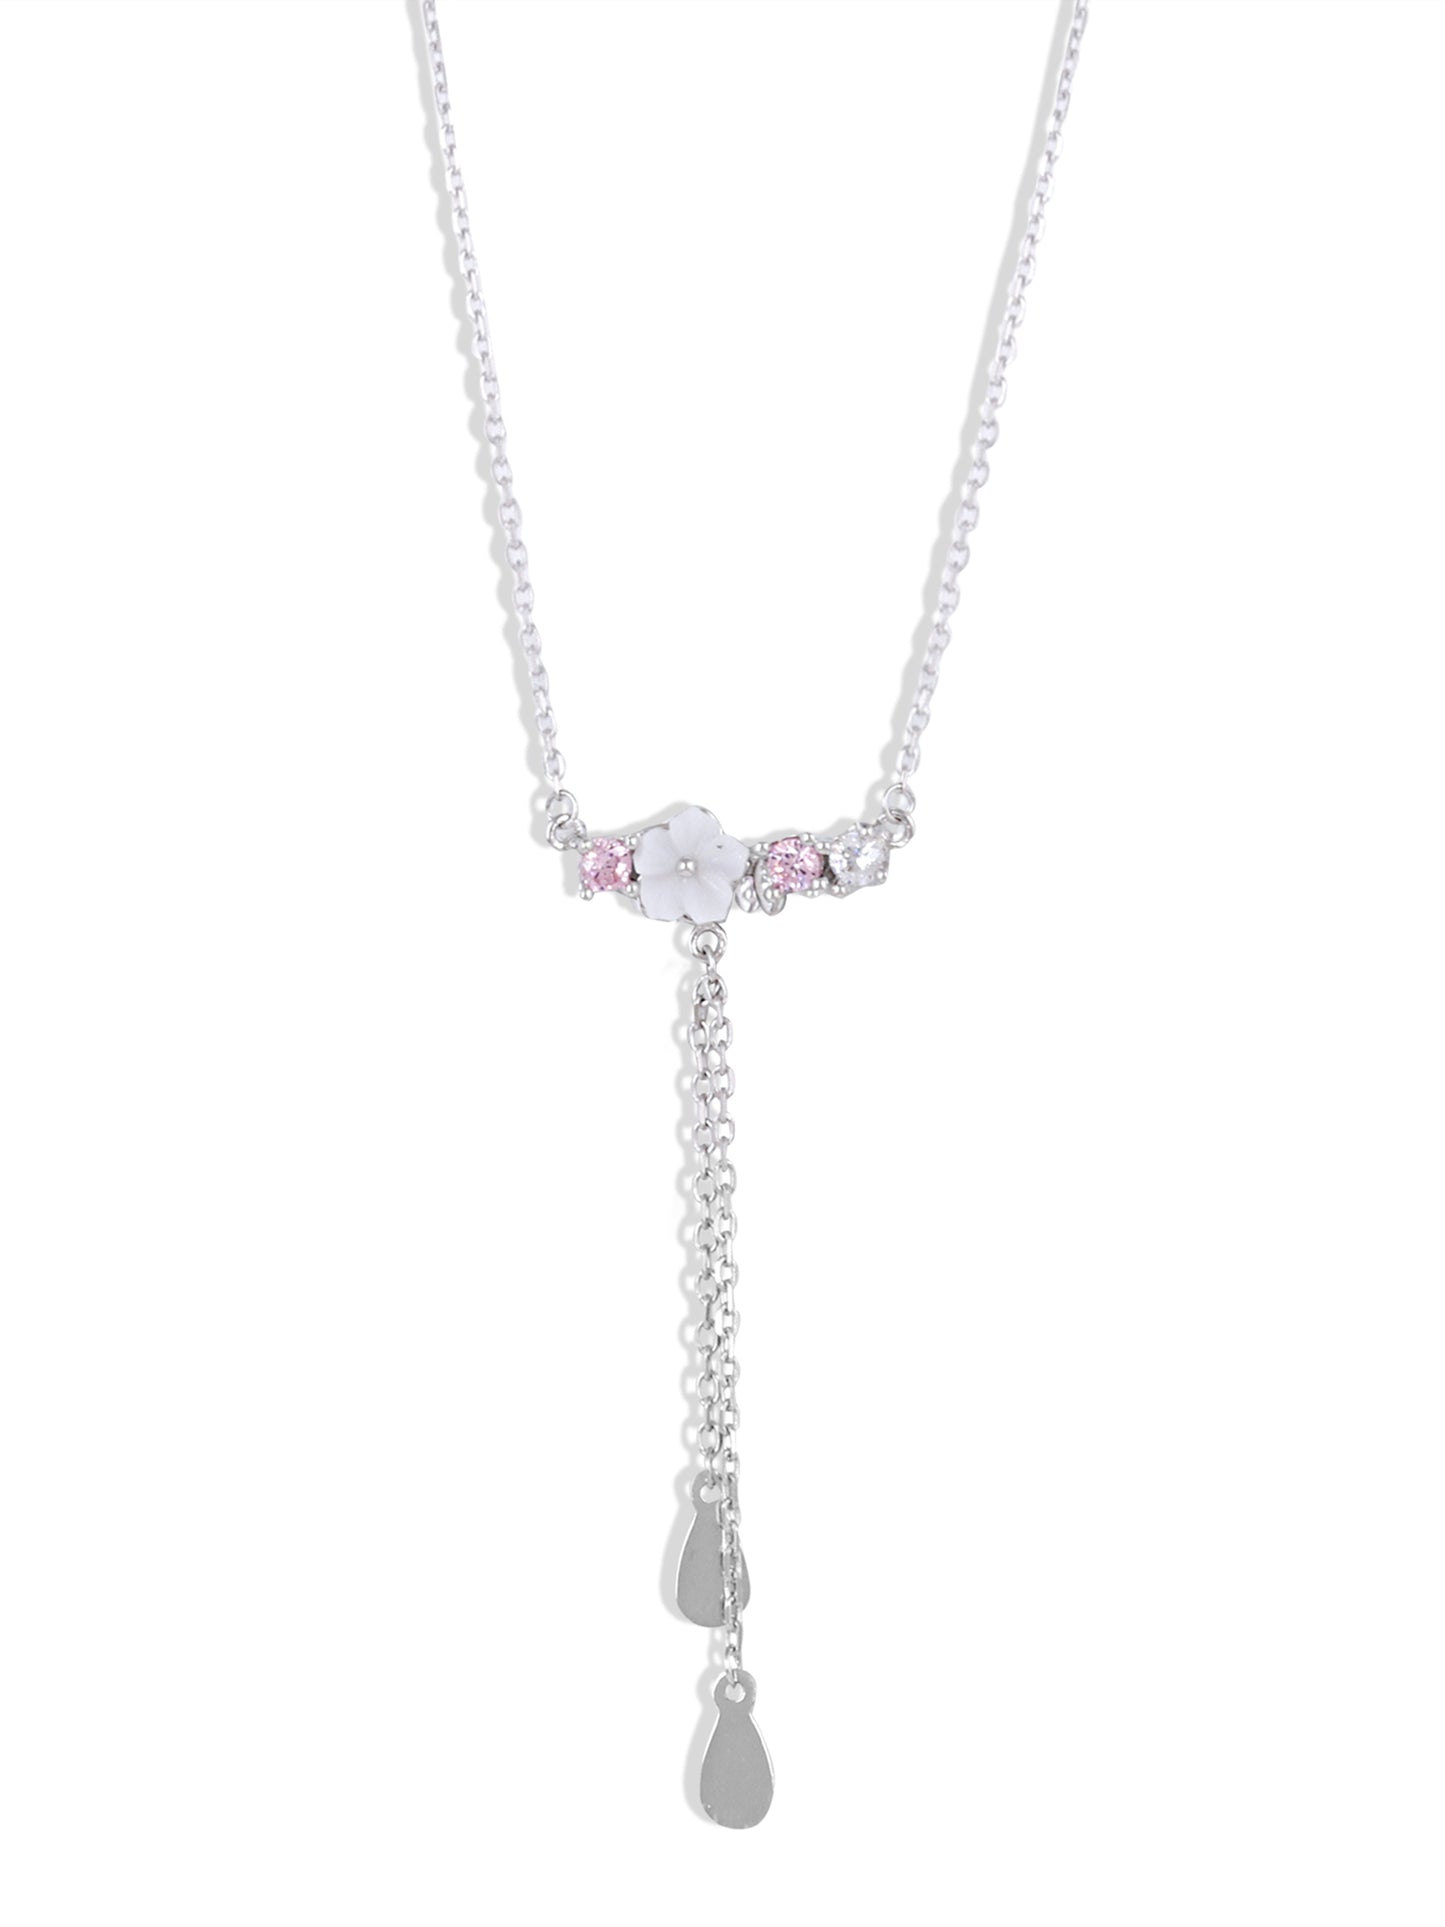 White Flower Necklace with pink stones